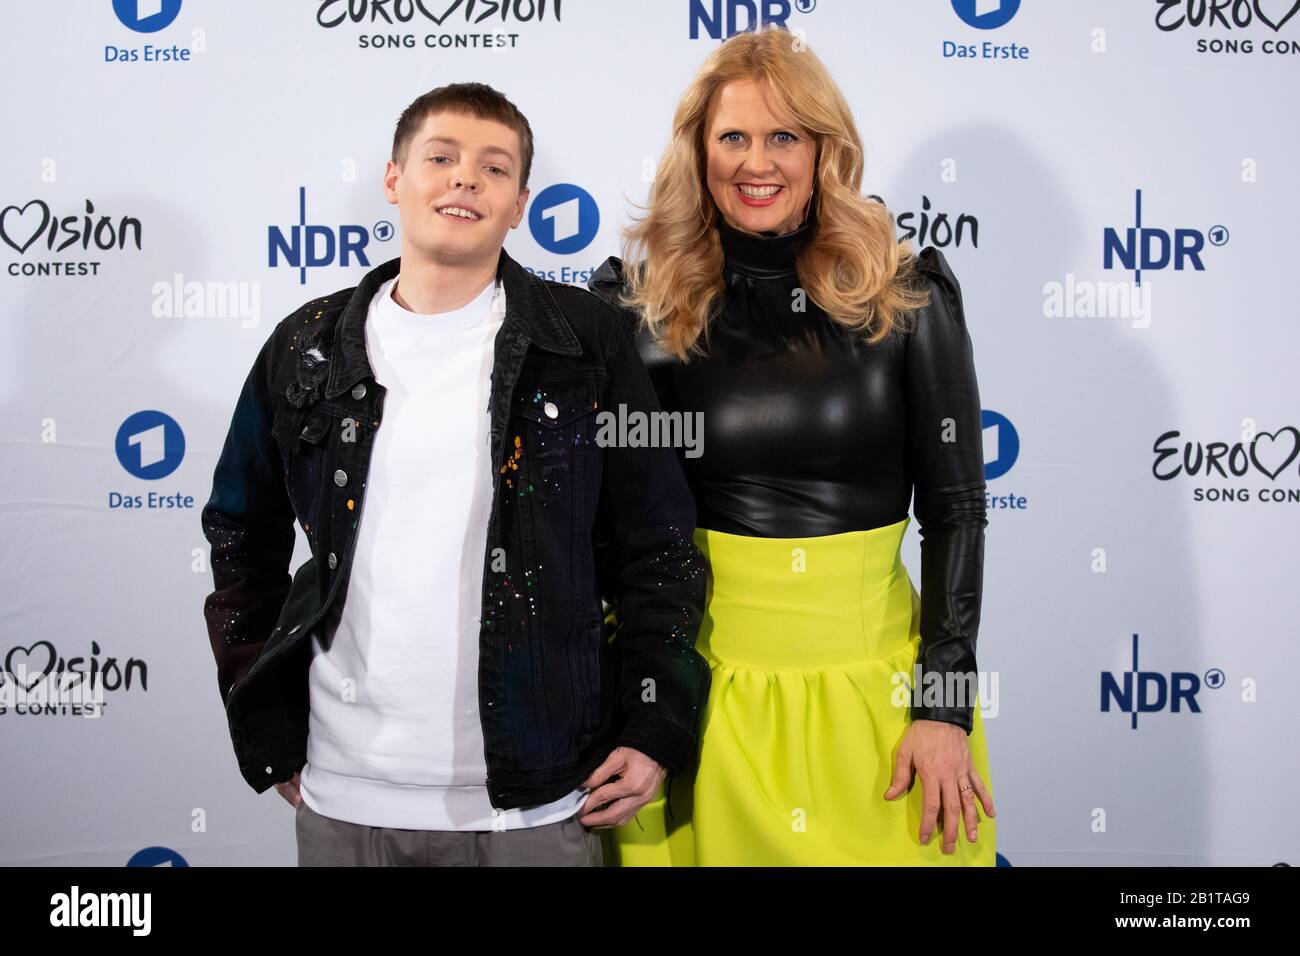 27 February 2020, Hamburg: The presenter Barbara Schöneberger (r) and the singer Ben Dolic during a photo session after announcing his participation in the final of the Eurovision Song Contest. The 22-year-old Slovenian will be competing for Germany at the ESC finals in Rotterdam on 16 May. There he will sing the song "Violent Thing". Photo: Christian Charisius/dpa Stock Photo